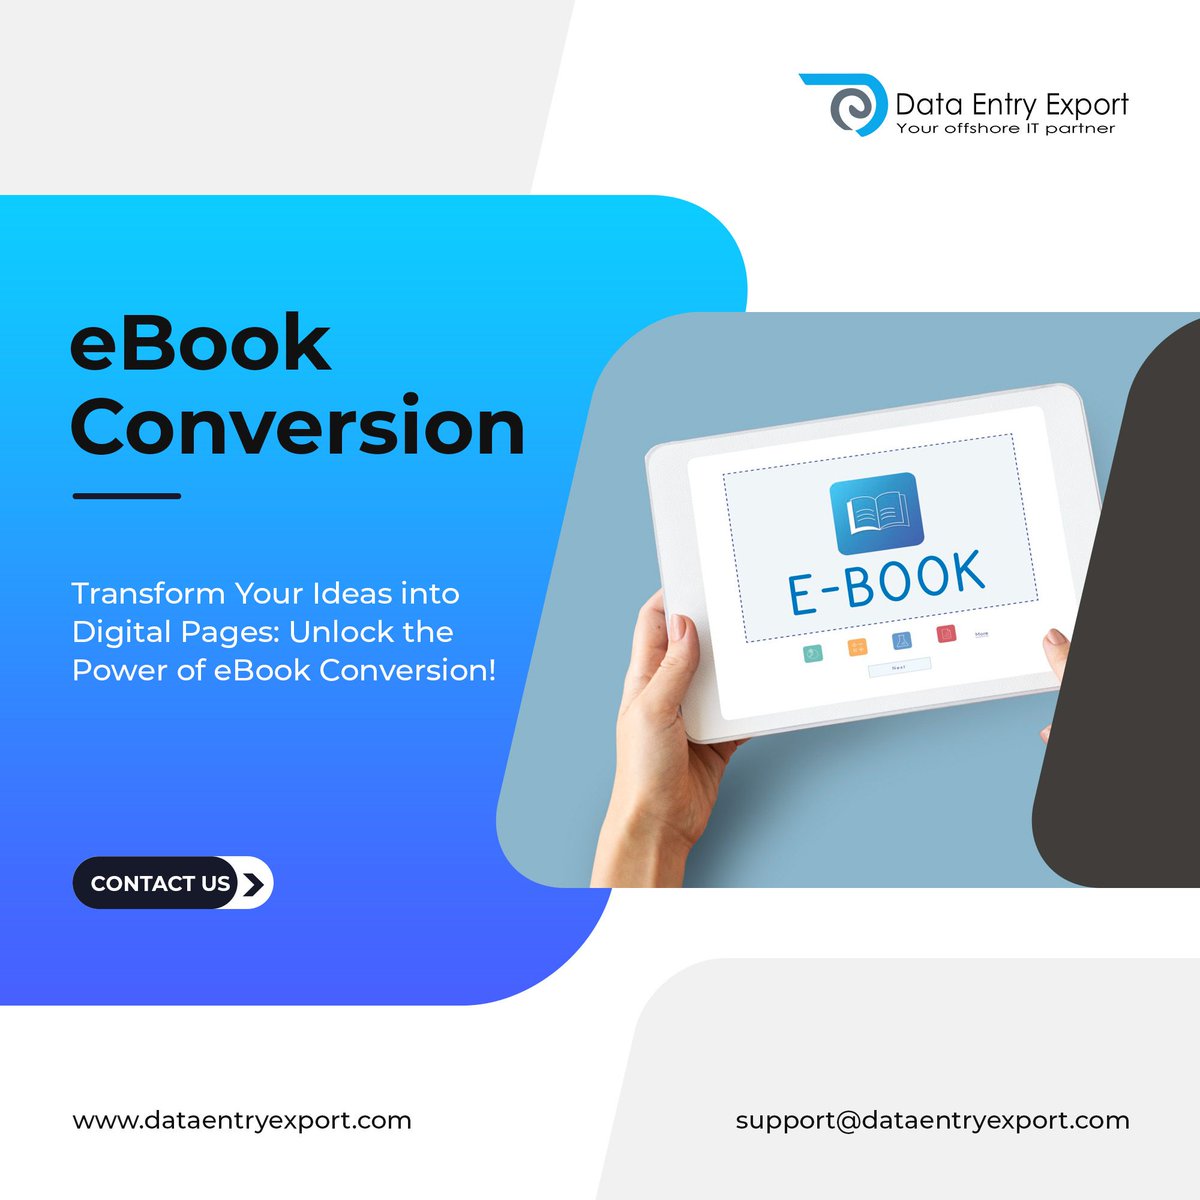 Ready to publish your book? Our ebook conversion services ensure seamless transition to digital formats.

Read more: dataentryexport.com/ebook-conversi…

Email us: support@dataentryexport.com

#ebook #bookconversion #bposolutions #bposervices #business